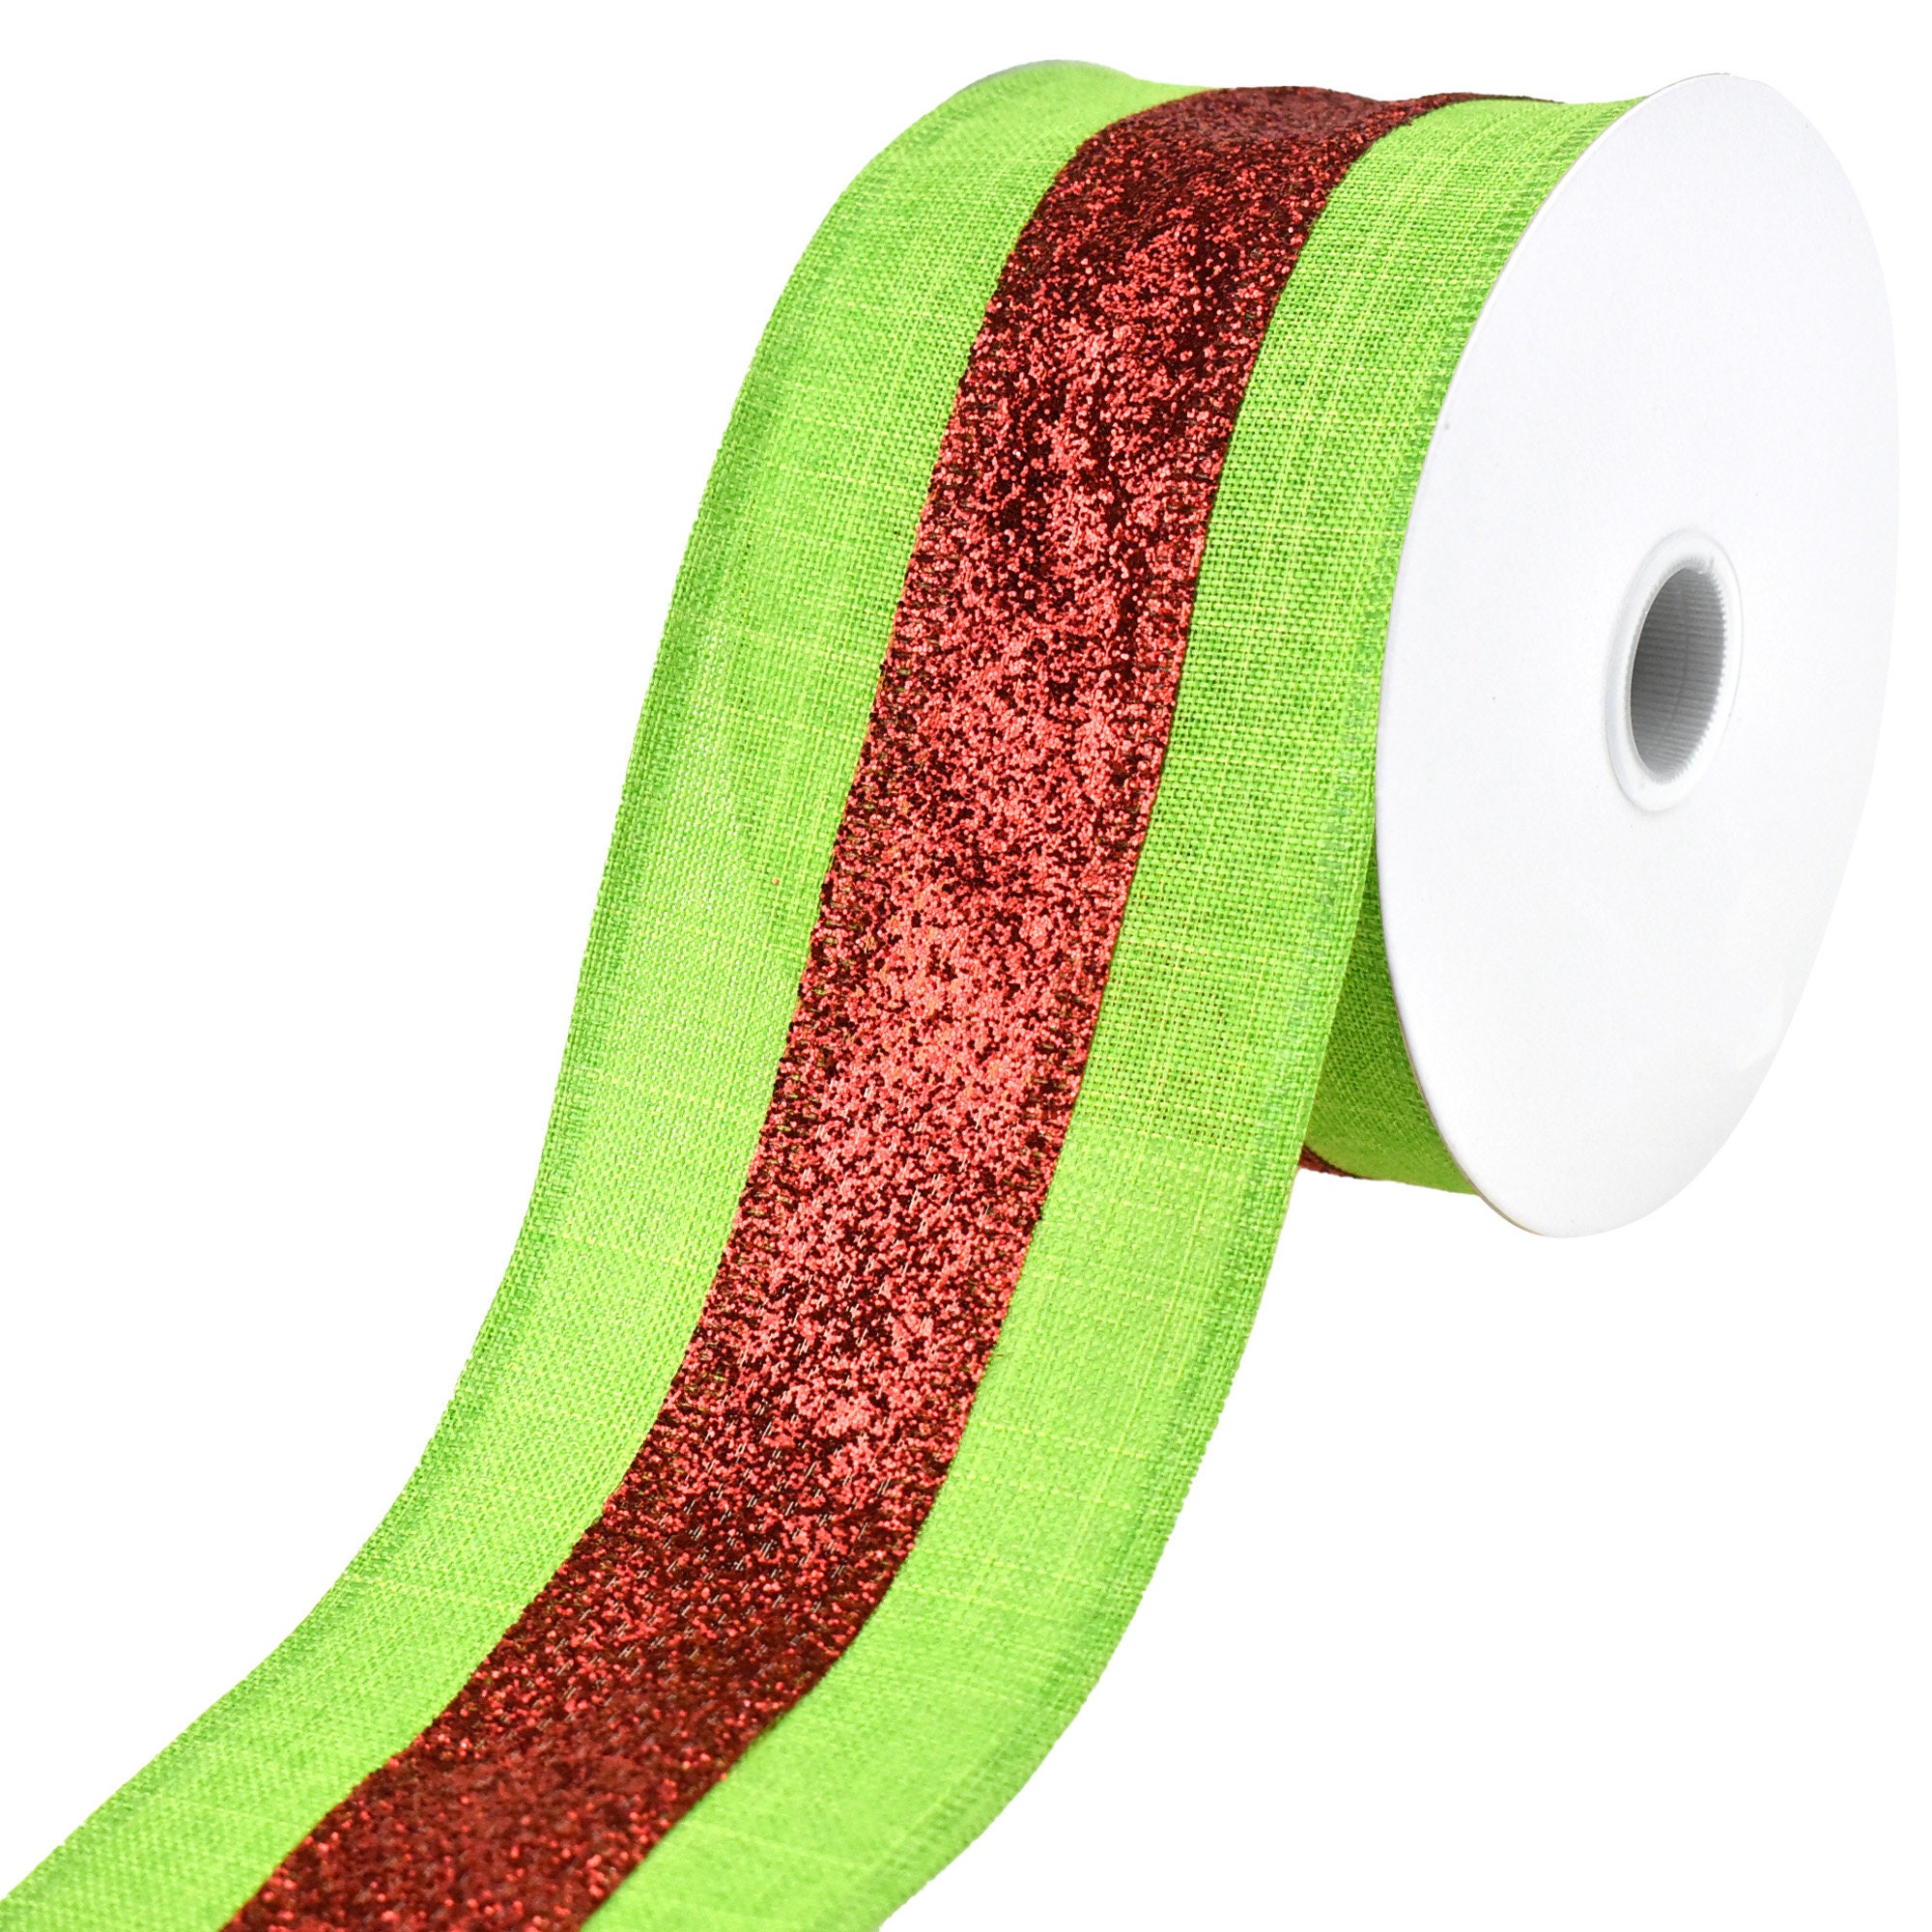 Lime Green Satin Ribbon 1 1/2 Inch 50 Yard Roll for Gift Wrapping